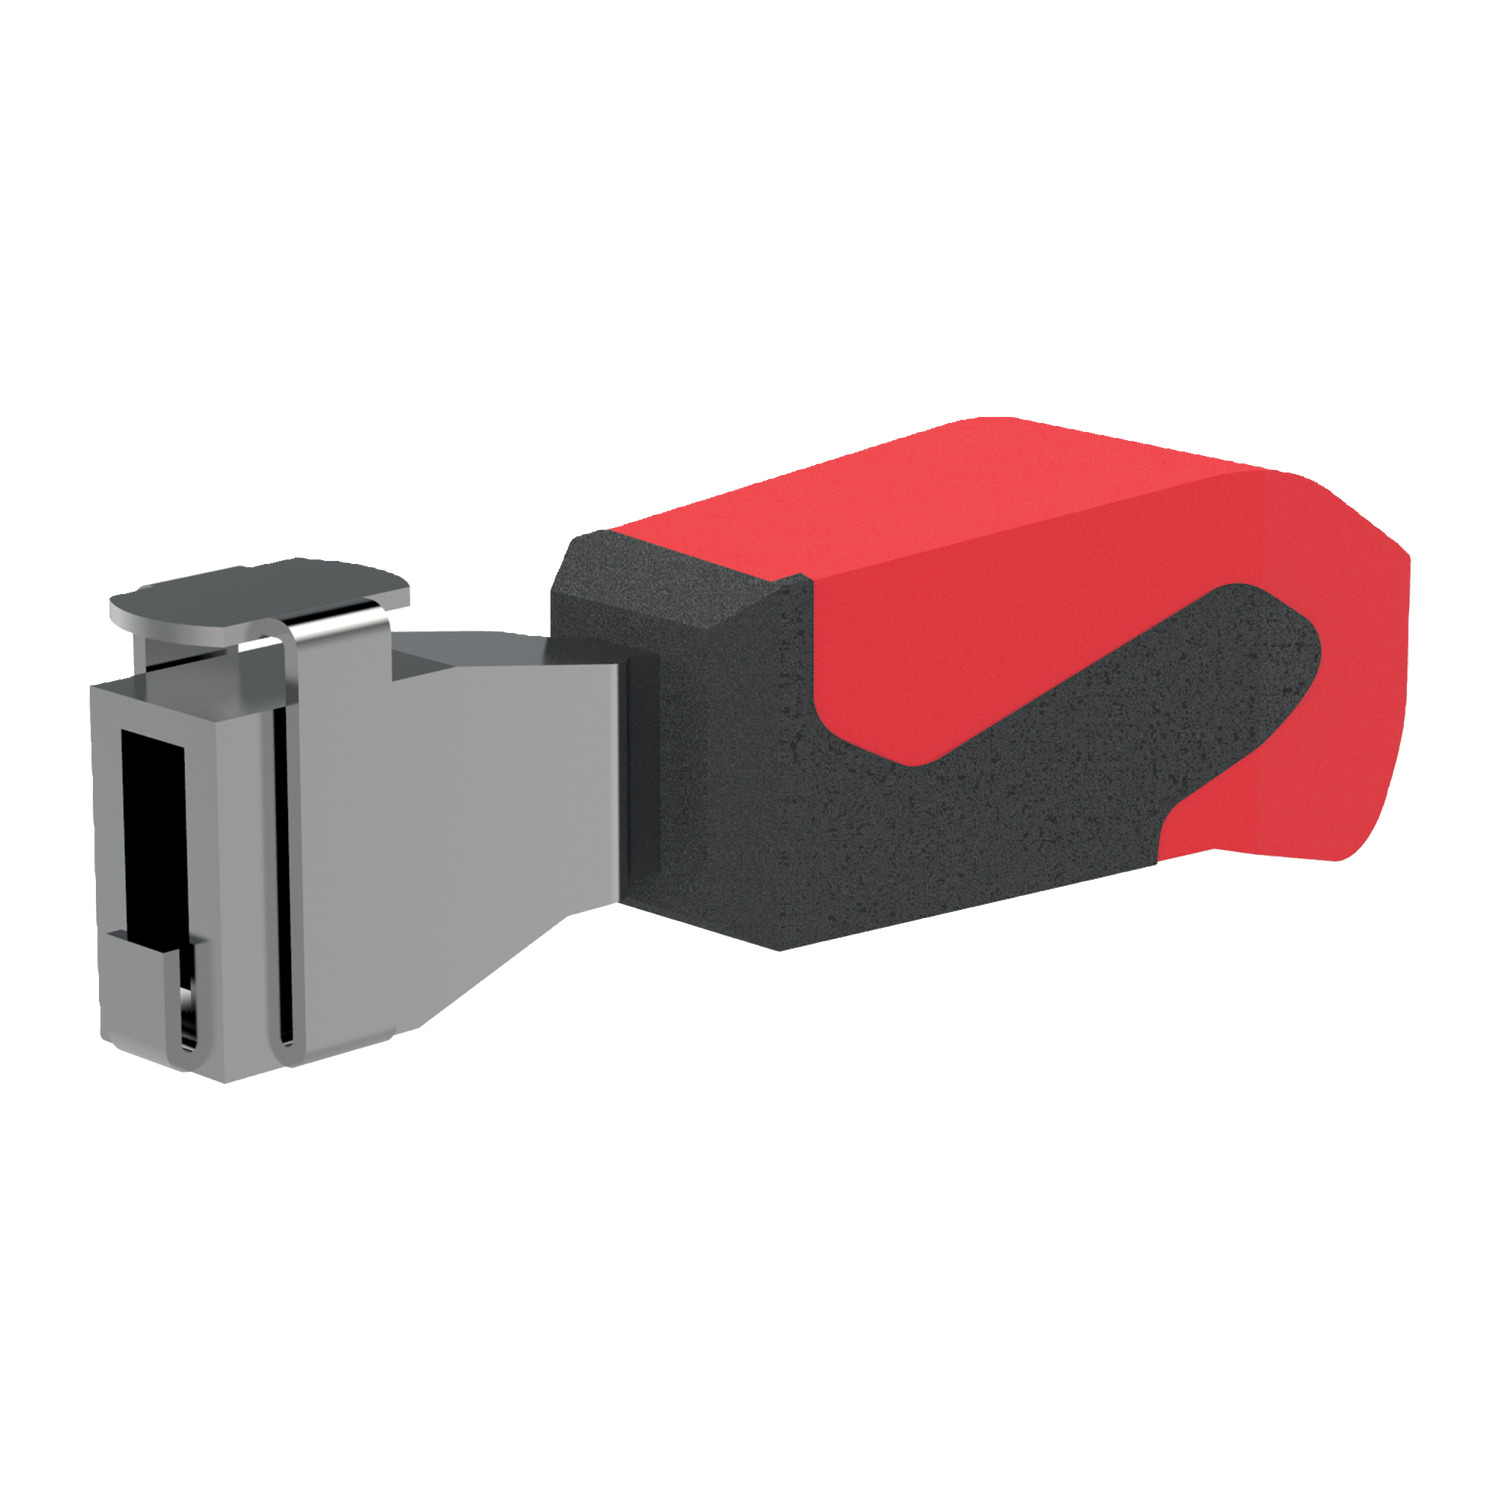 41005.W0102 Red handle - Removable for toggle clamp - size 2